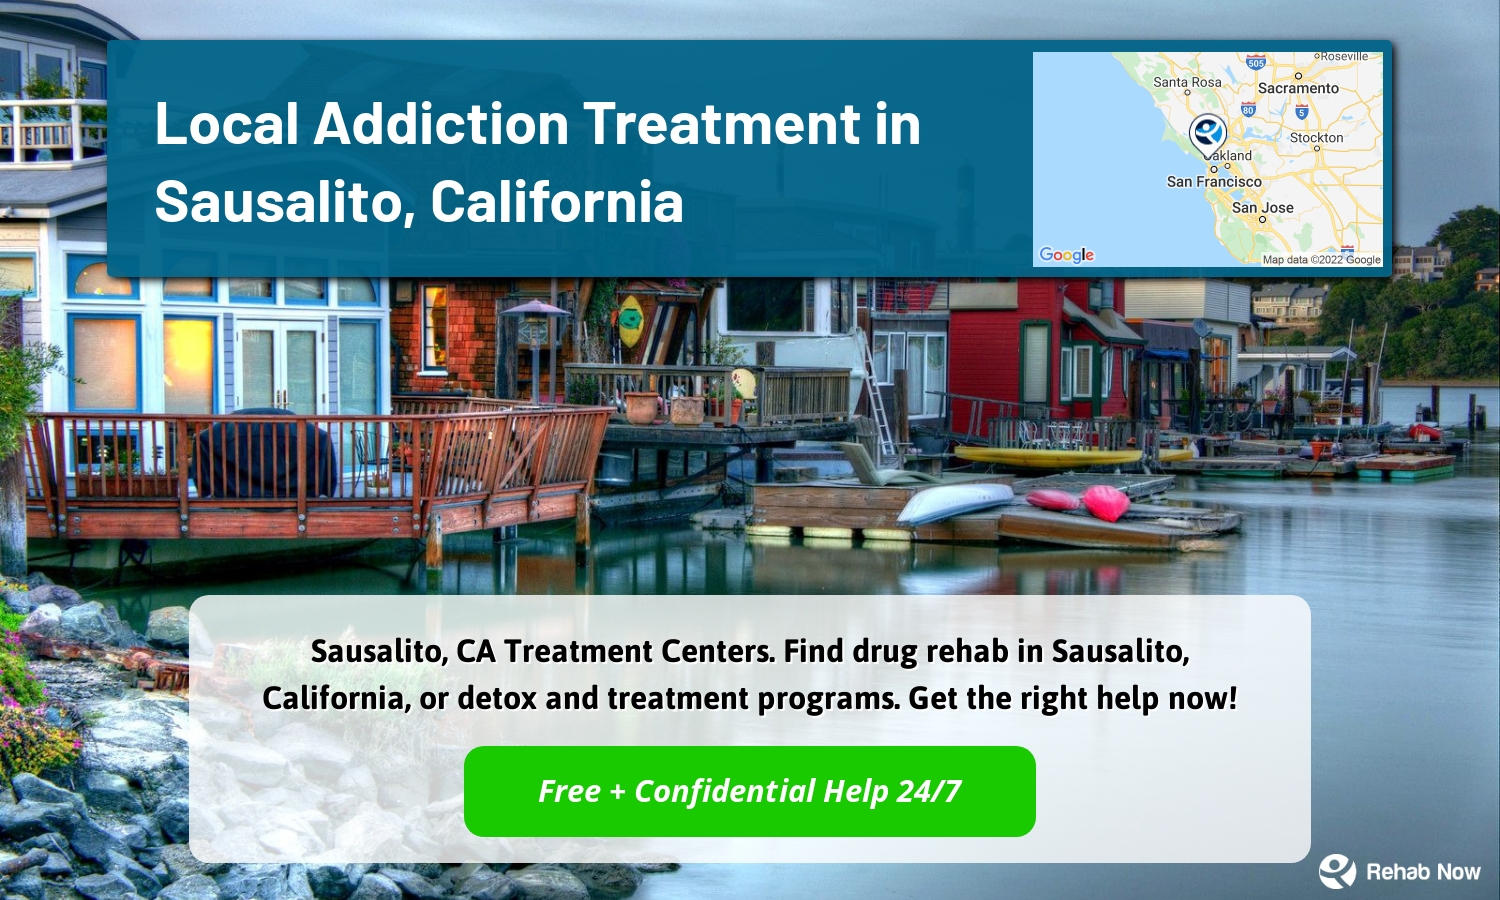 Sausalito, CA Treatment Centers. Find drug rehab in Sausalito, California, or detox and treatment programs. Get the right help now!